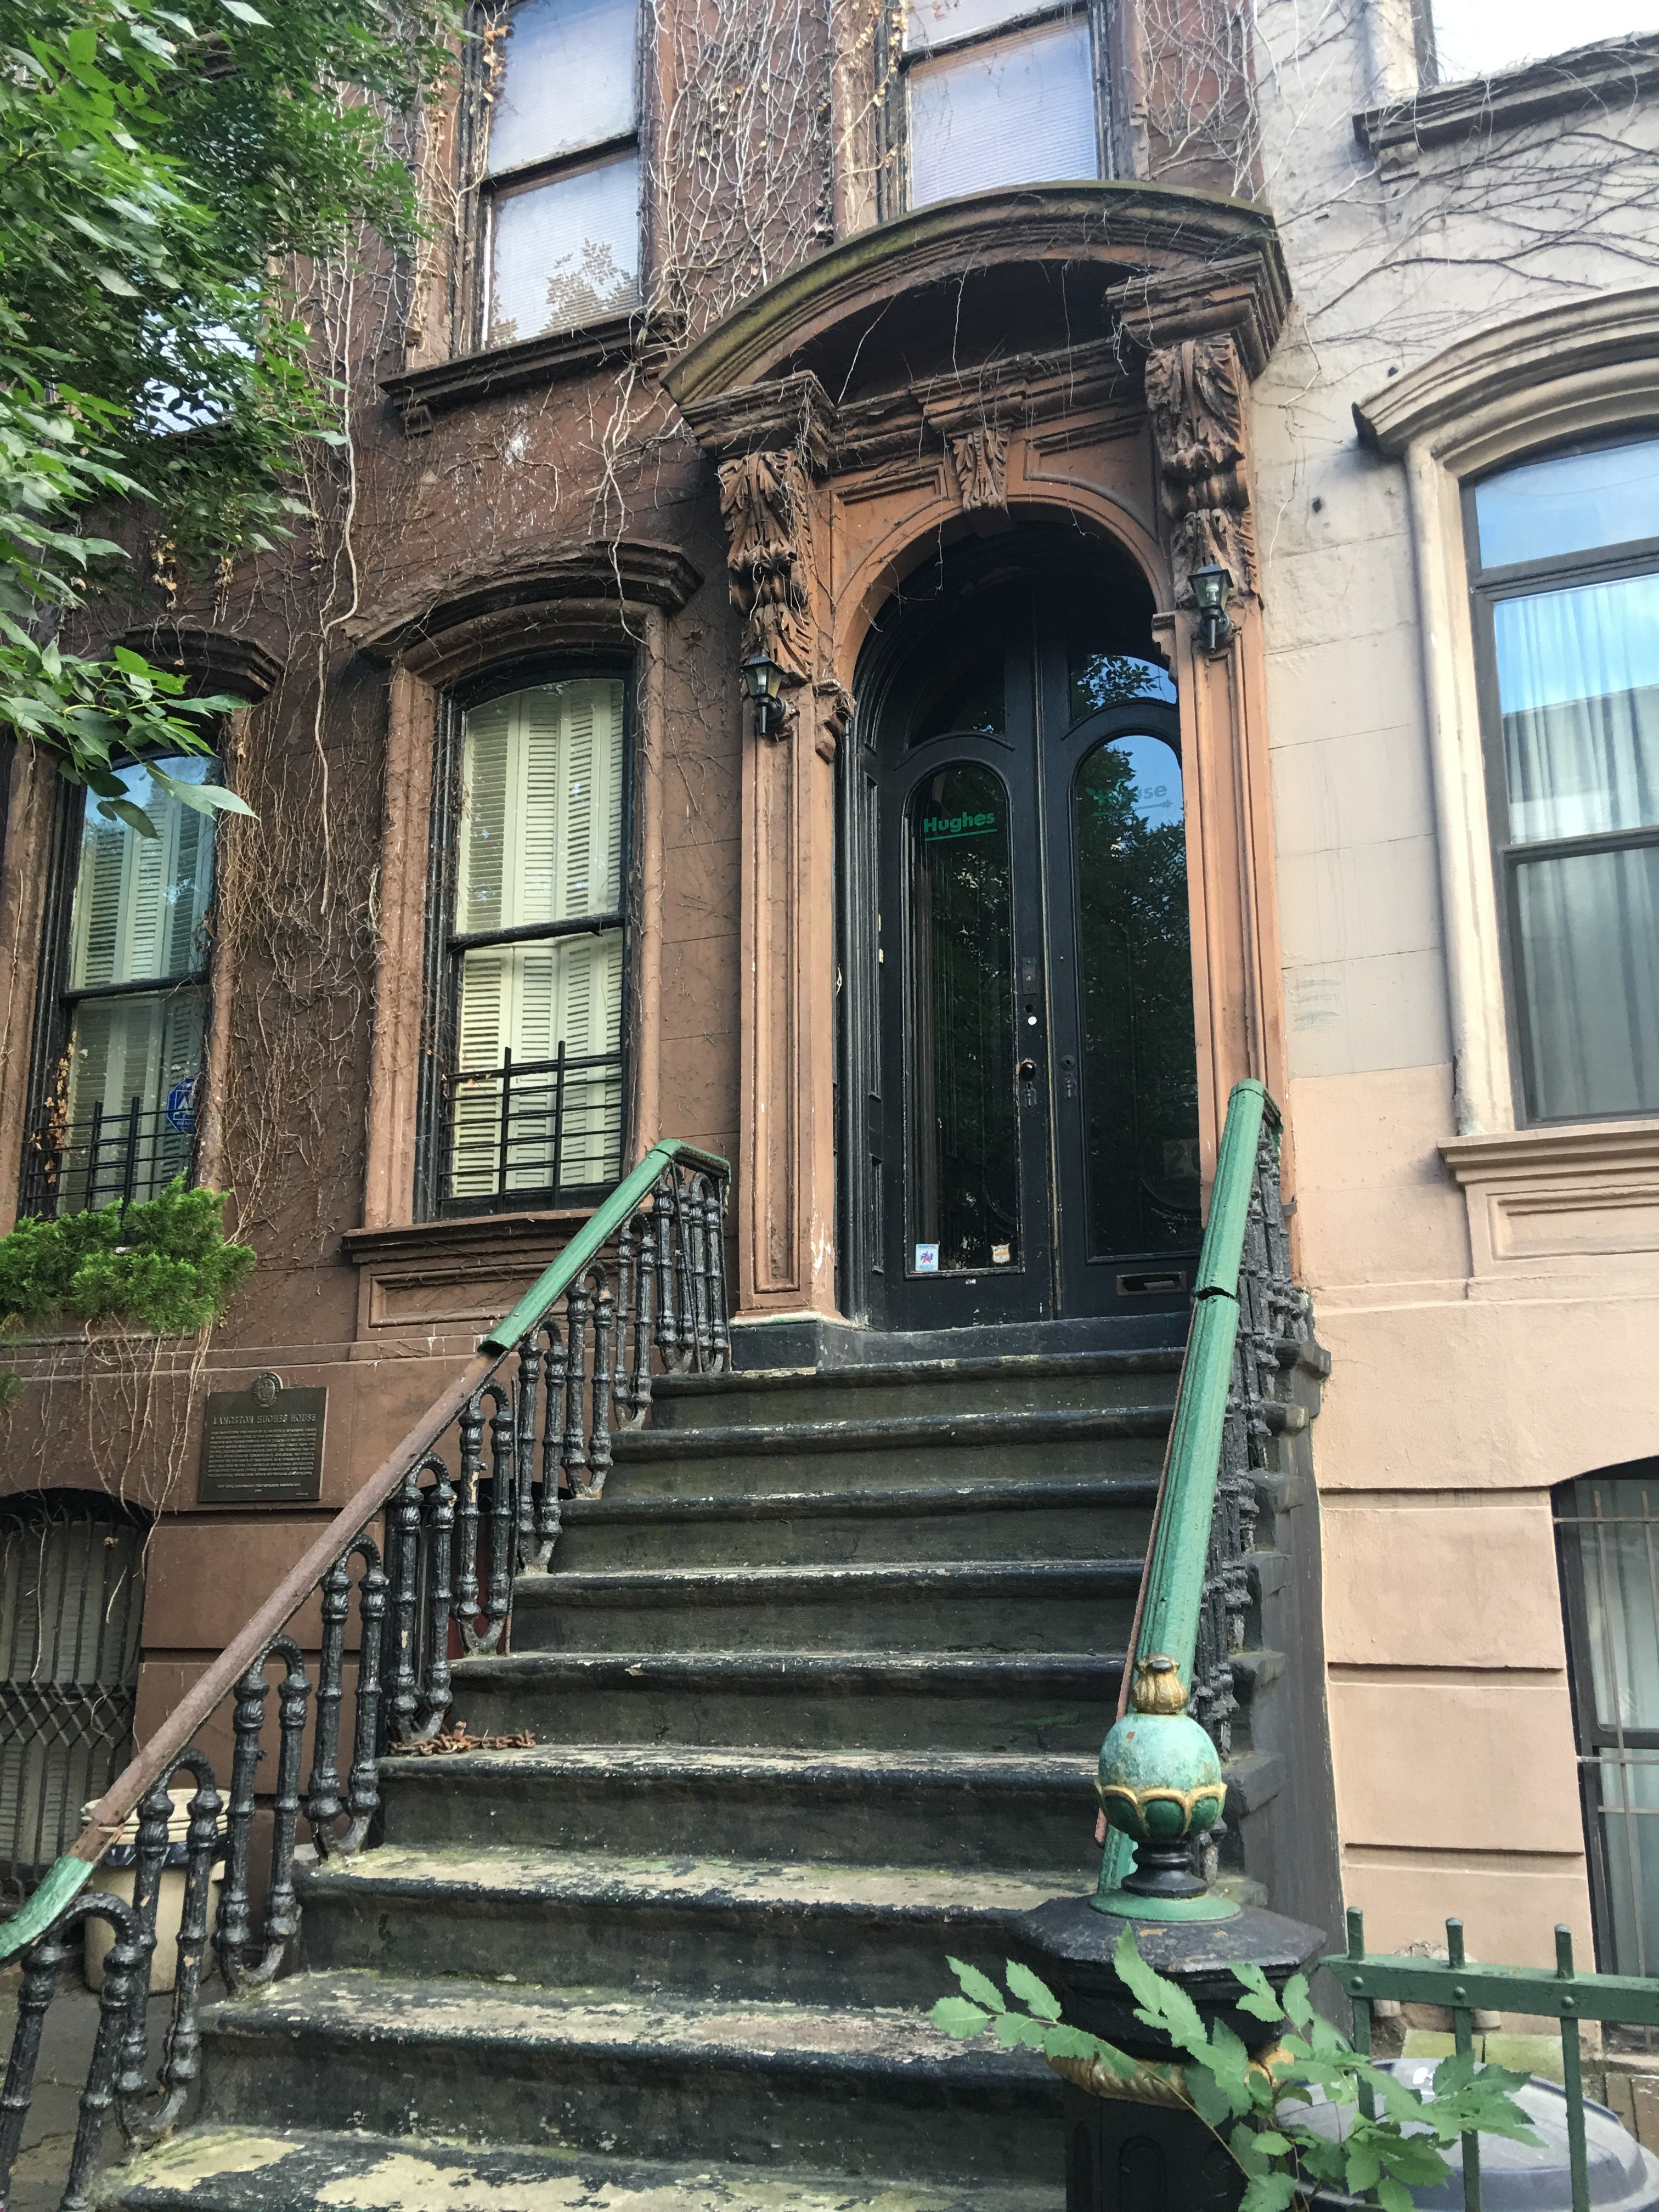 800 people donate to save Langston Hughes' house New